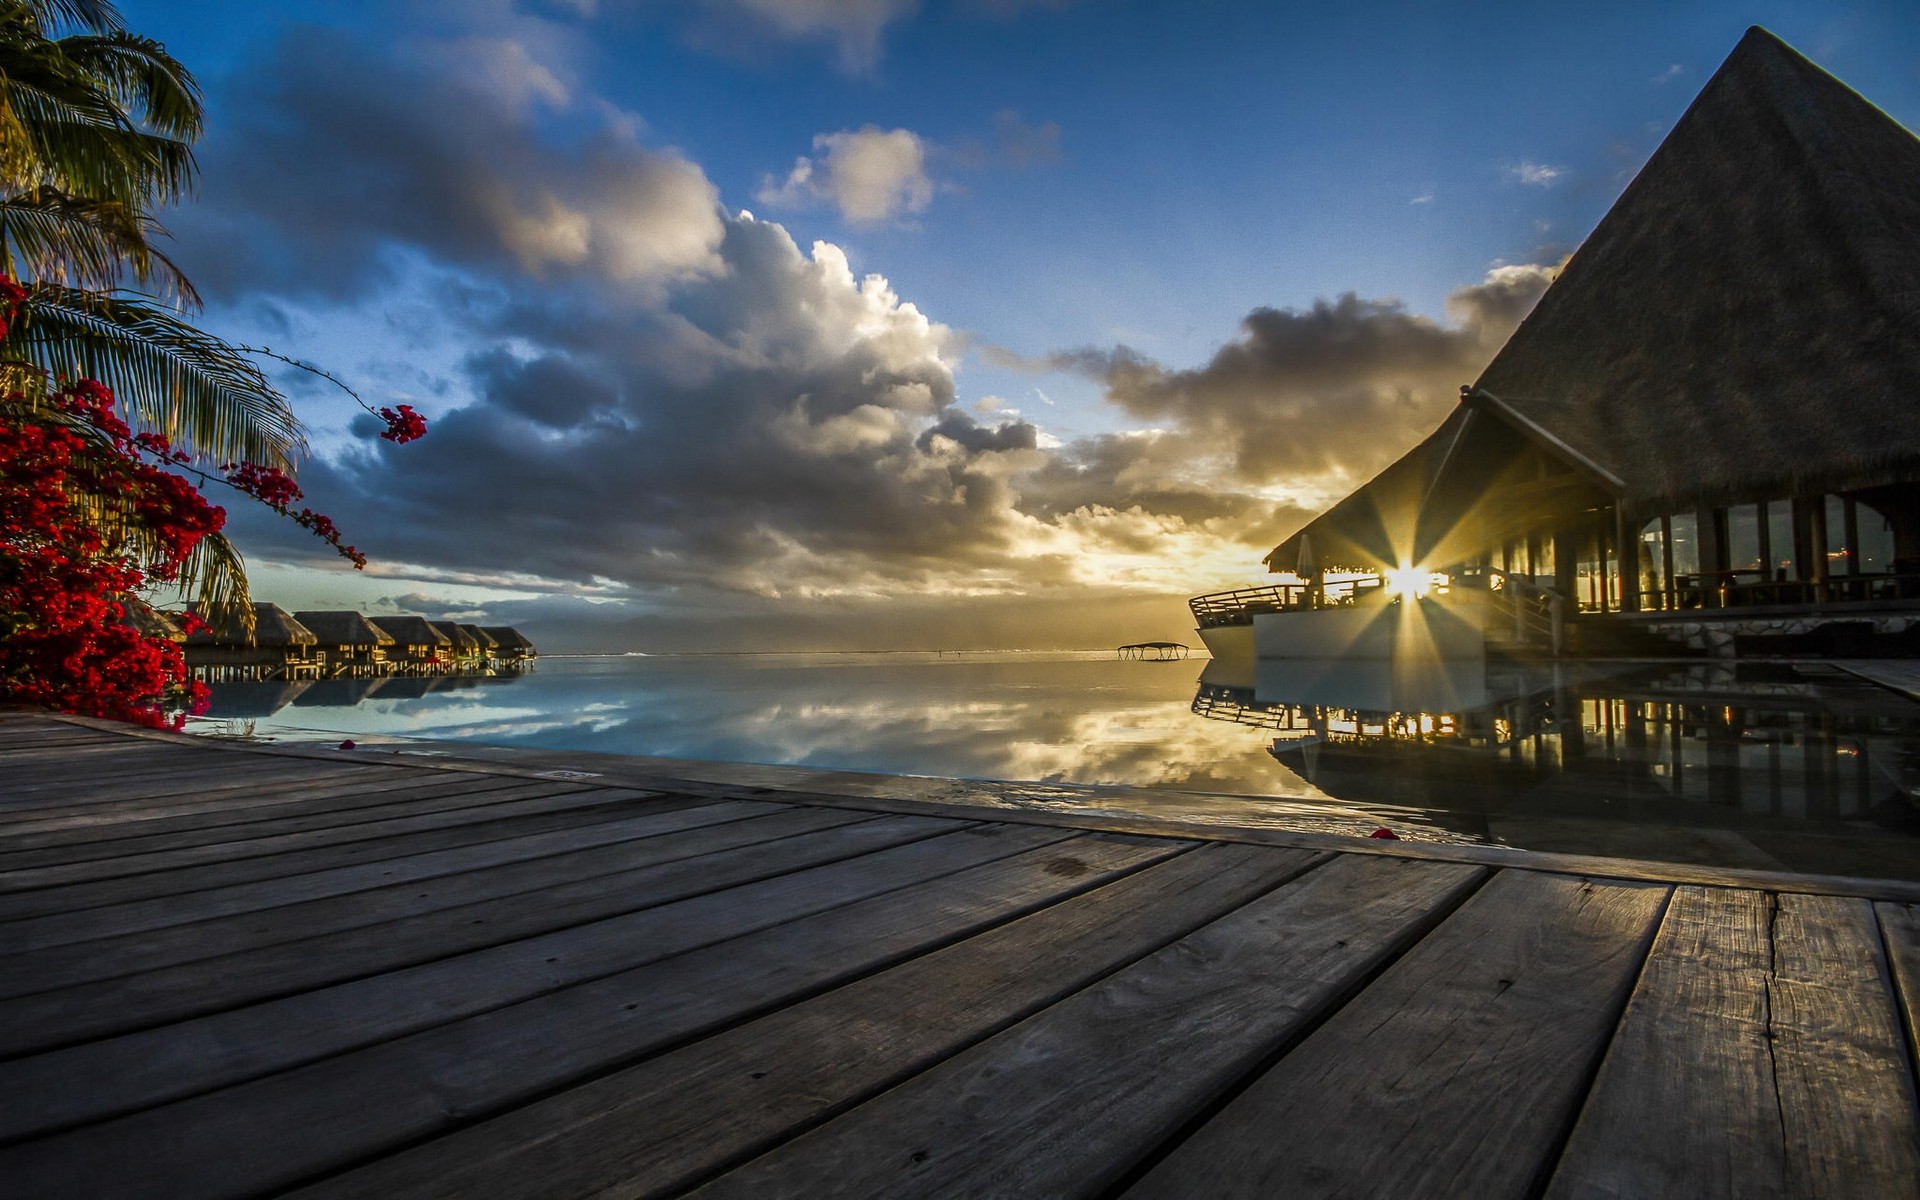 sunset, Tahiti, French Polynesia, Resort, Sea, Tropical, Nature, Palm Trees, Sun Rays, Walkway, Bungalow, Flowers, Clouds, Landscape, Summer, Vacations Wallpaper